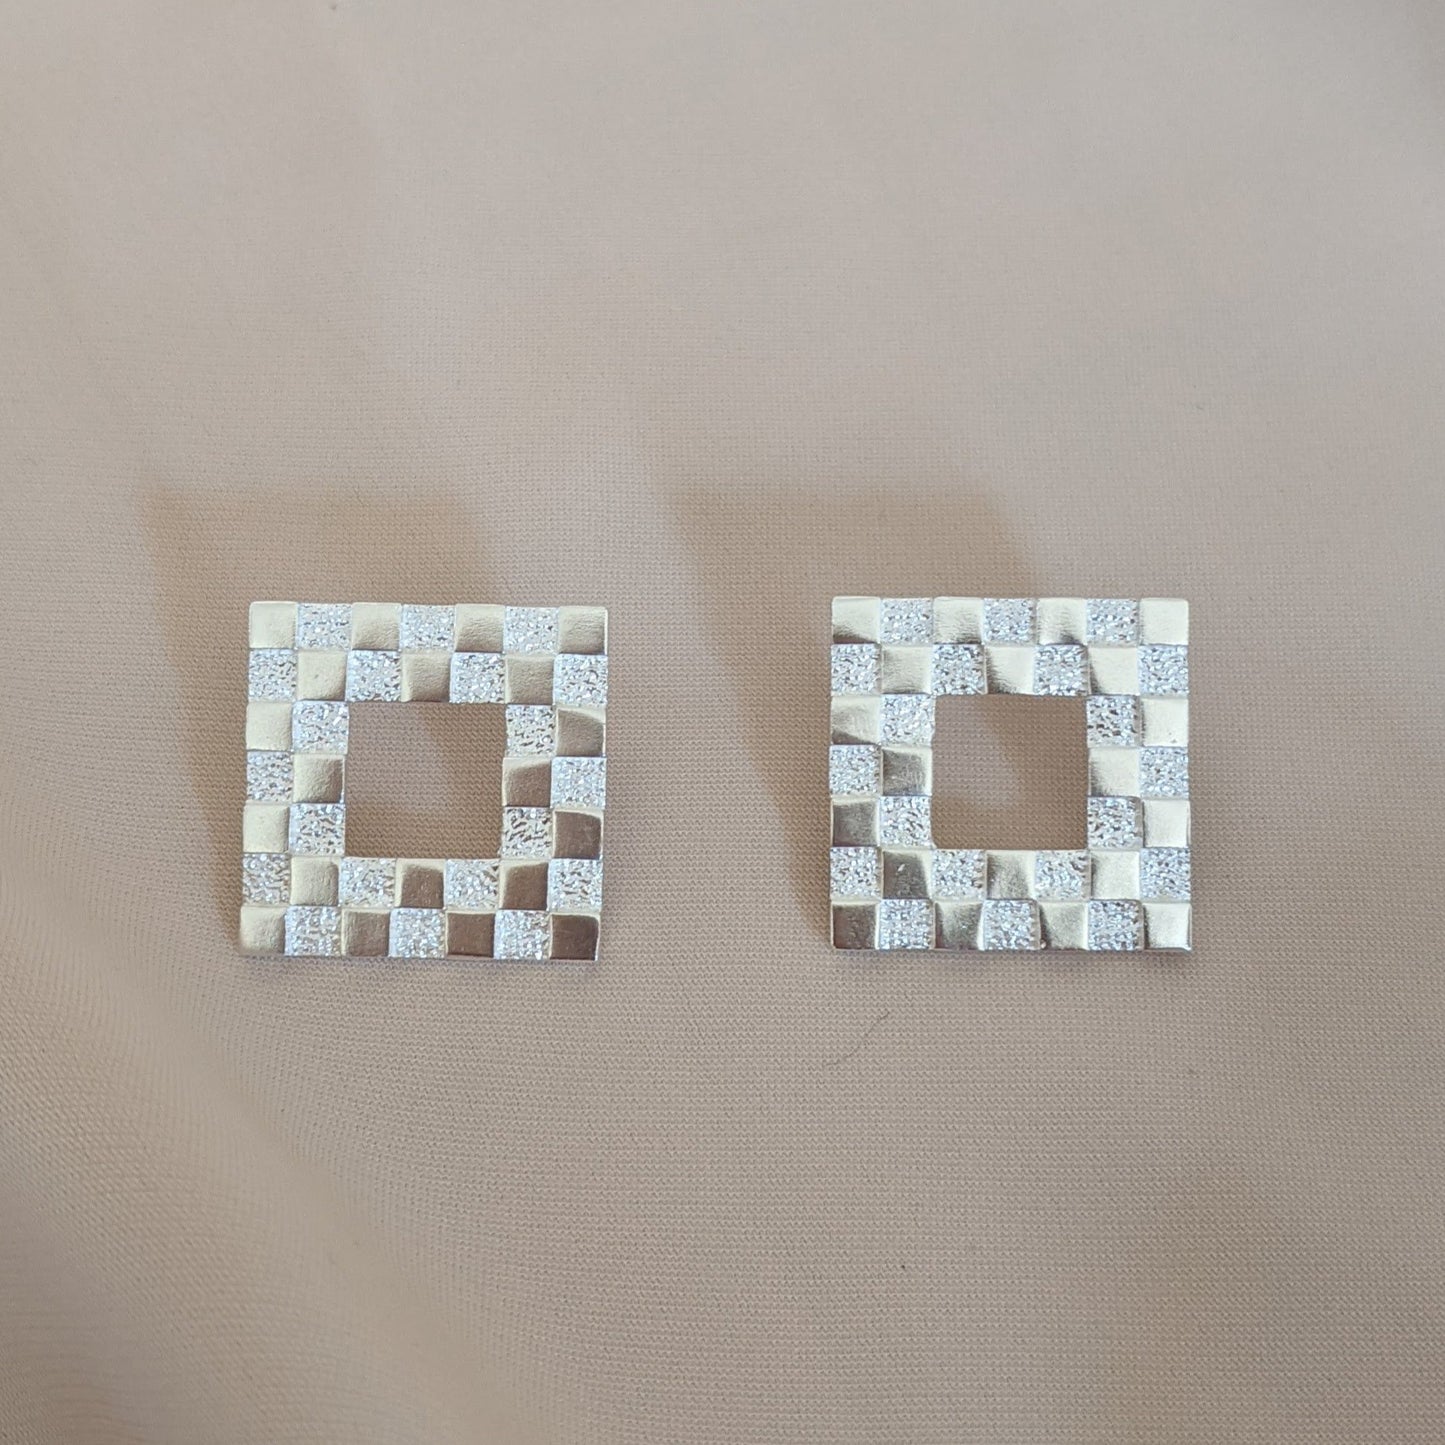 Square Checkerboard Earrings